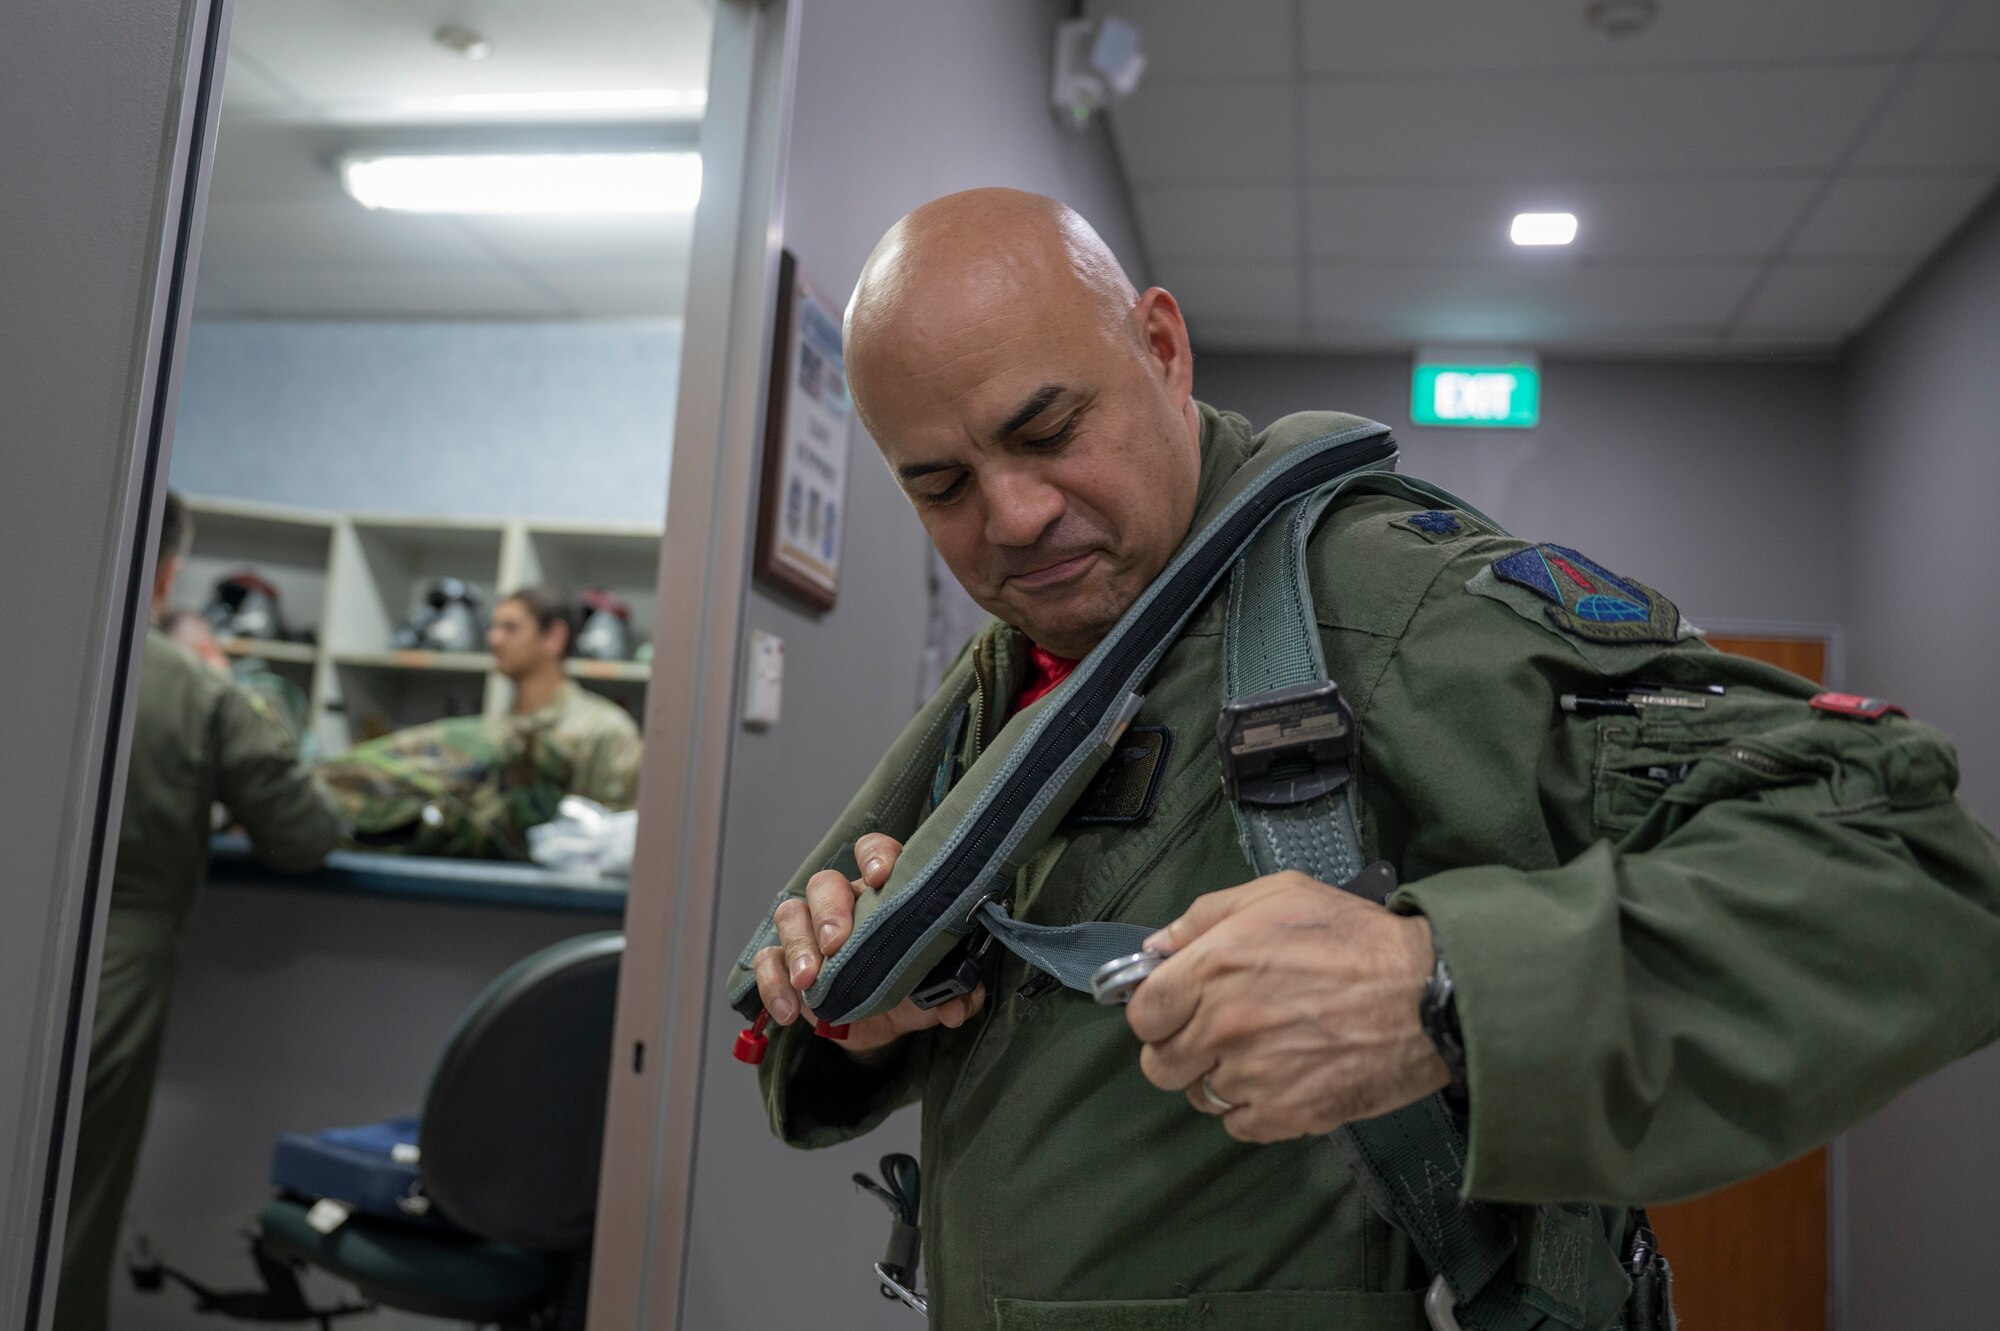 U.S. Air Force Lt. Col. Eric Alvarez, 345th Expeditionary Bomb Squadron commander, out of Dyess Air Force Base, Texas, puts on his vest at Paya Lebar Air Base, Singapore, Jan. 19, 2024. The B-1B Lancer conducted air-to-air refueling with the Republic of Singapore Air Force A330 Multi Role Tanker Transport. (U.S. Air Force Photo by Senior Airman Ryan Hayman)